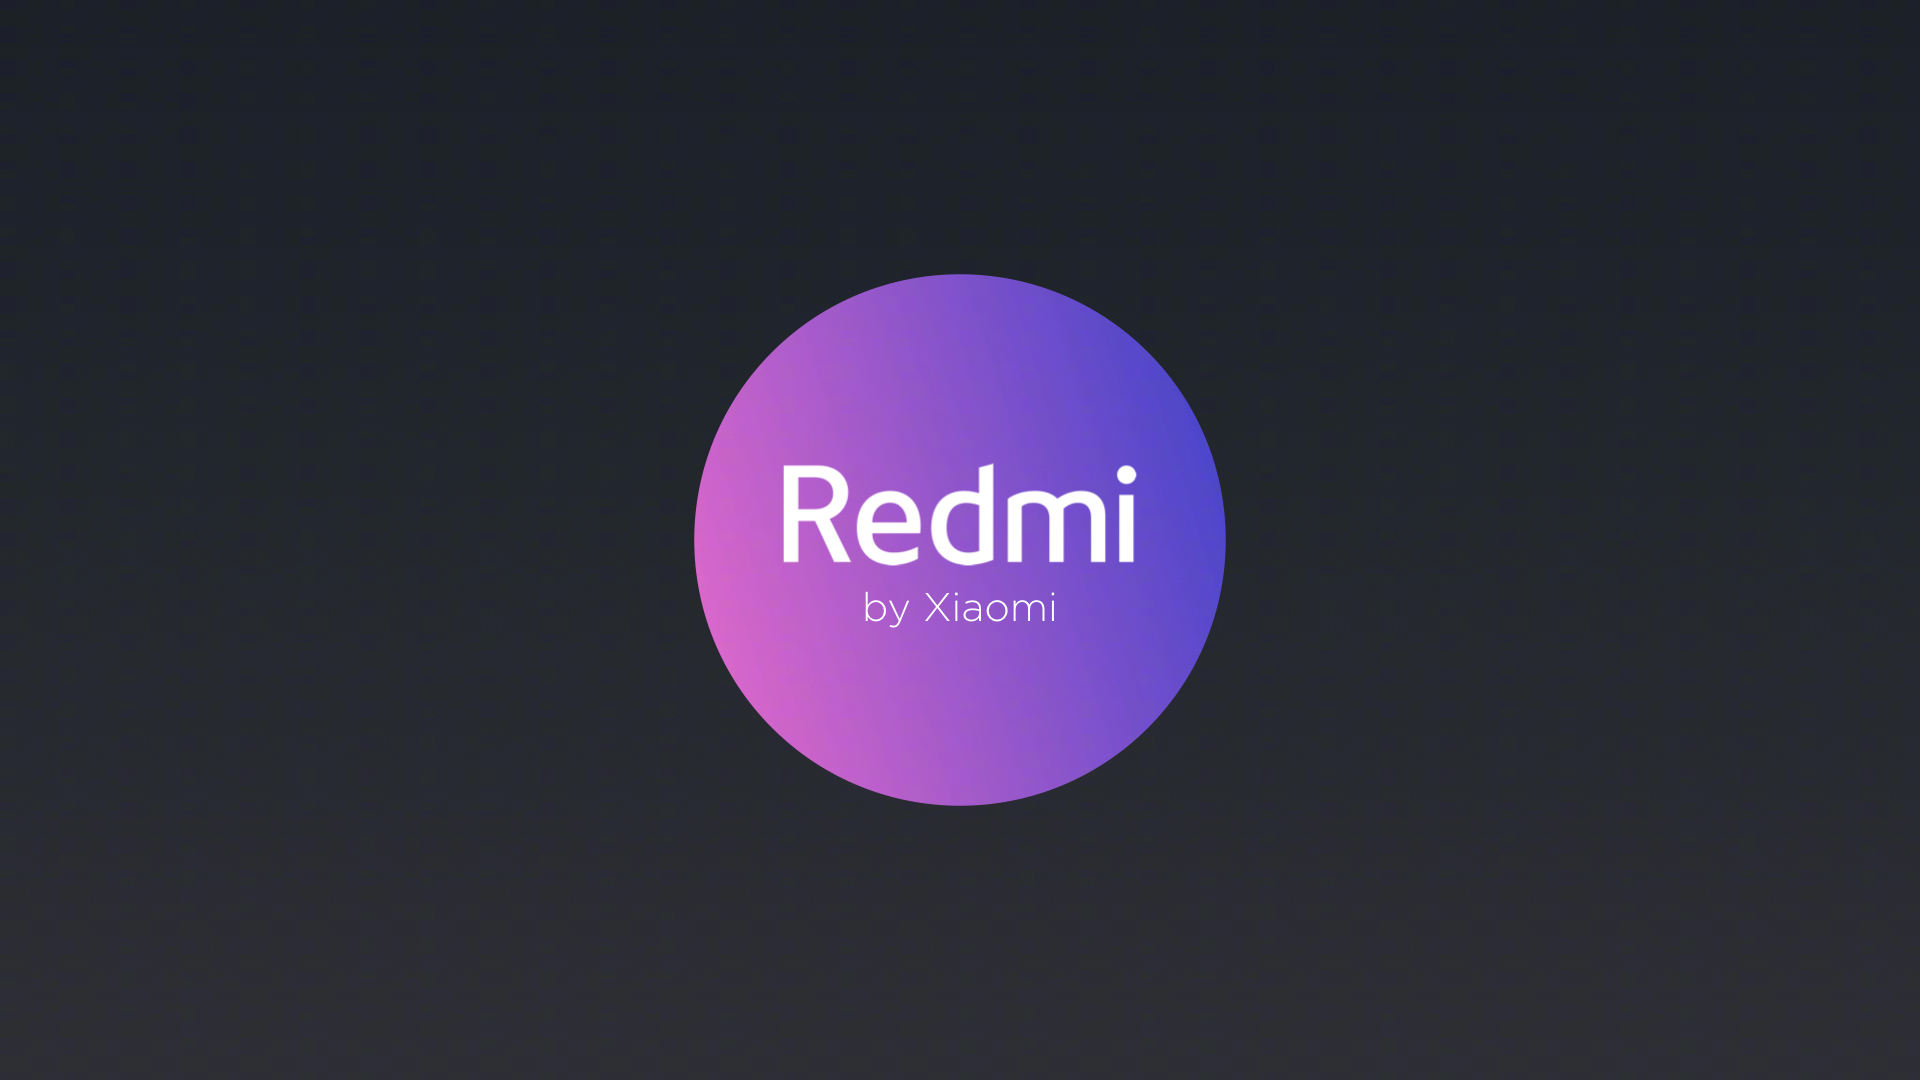 Redmi Y3 gets Wi-Fi certification, will come with Android Pie